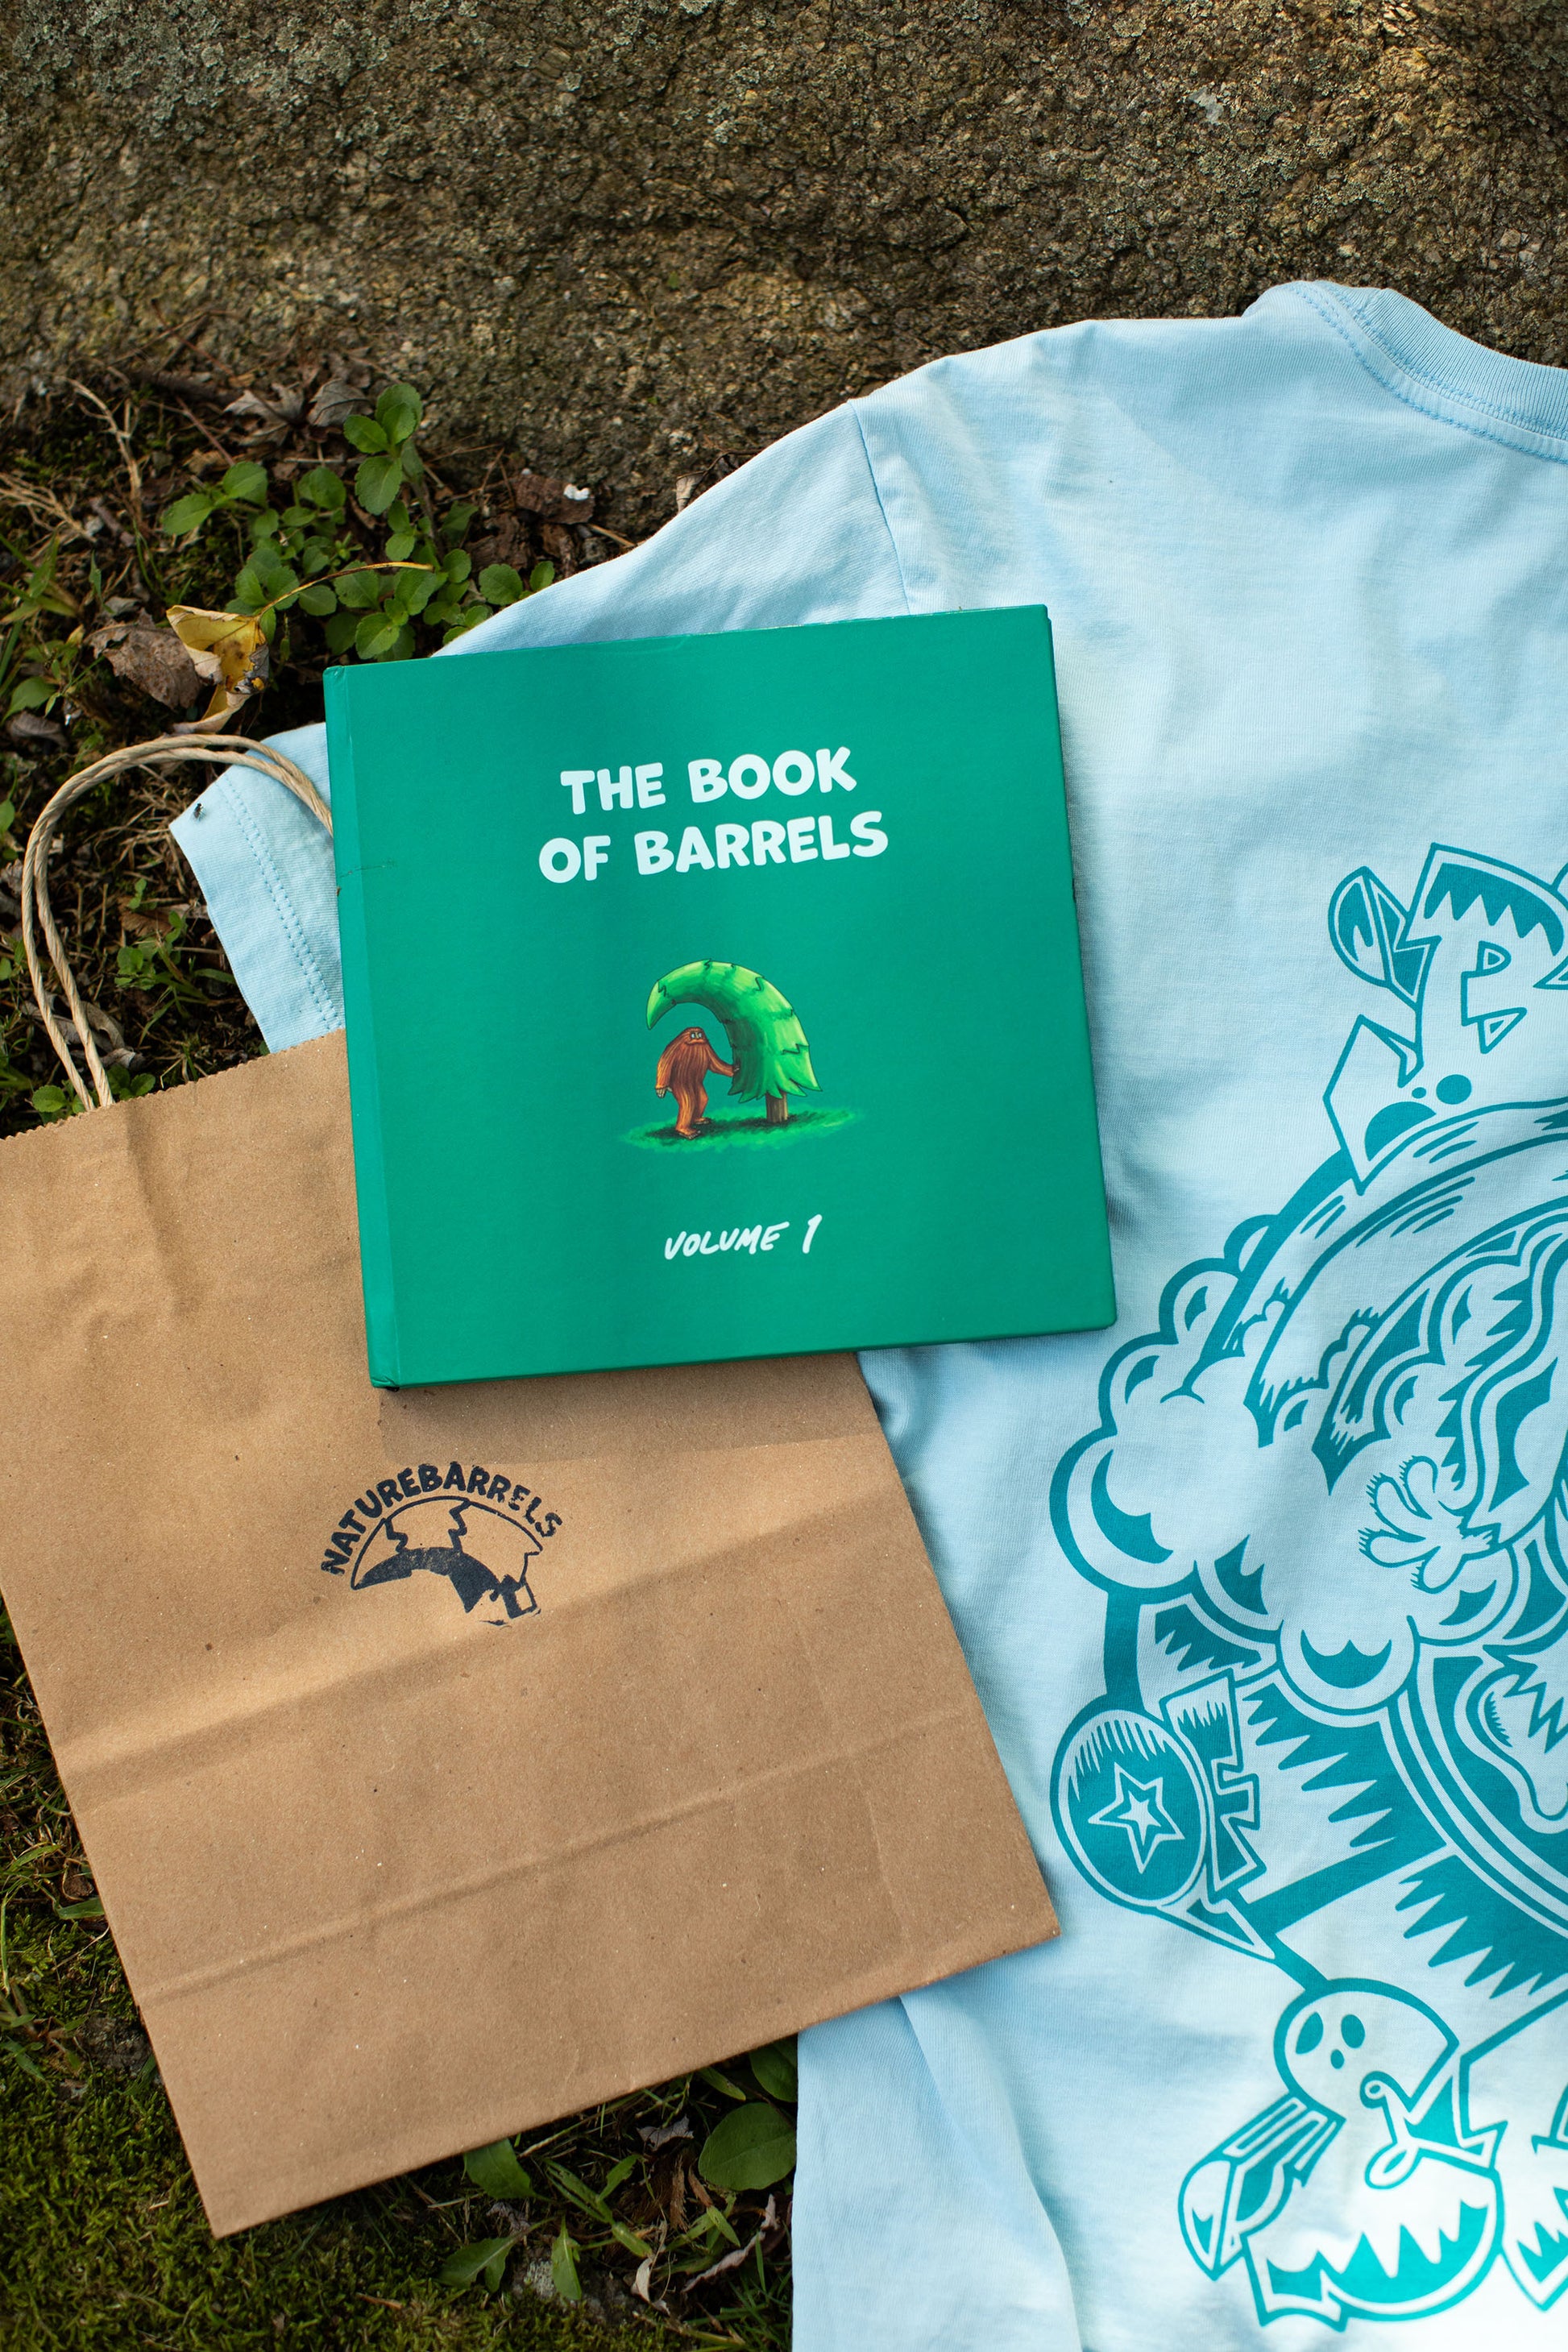 A top view of a hardcover book 'The Book of Barrels, Volume 1' showcasing an illustration of an orange sasquatch under a wave-shaped pine tree. The book is placed on the back of a light blue t-shirt with a thematic, intricate graphic. The book is adjacent to a brown paper bag with the brand's logo, on an outdoor setting.